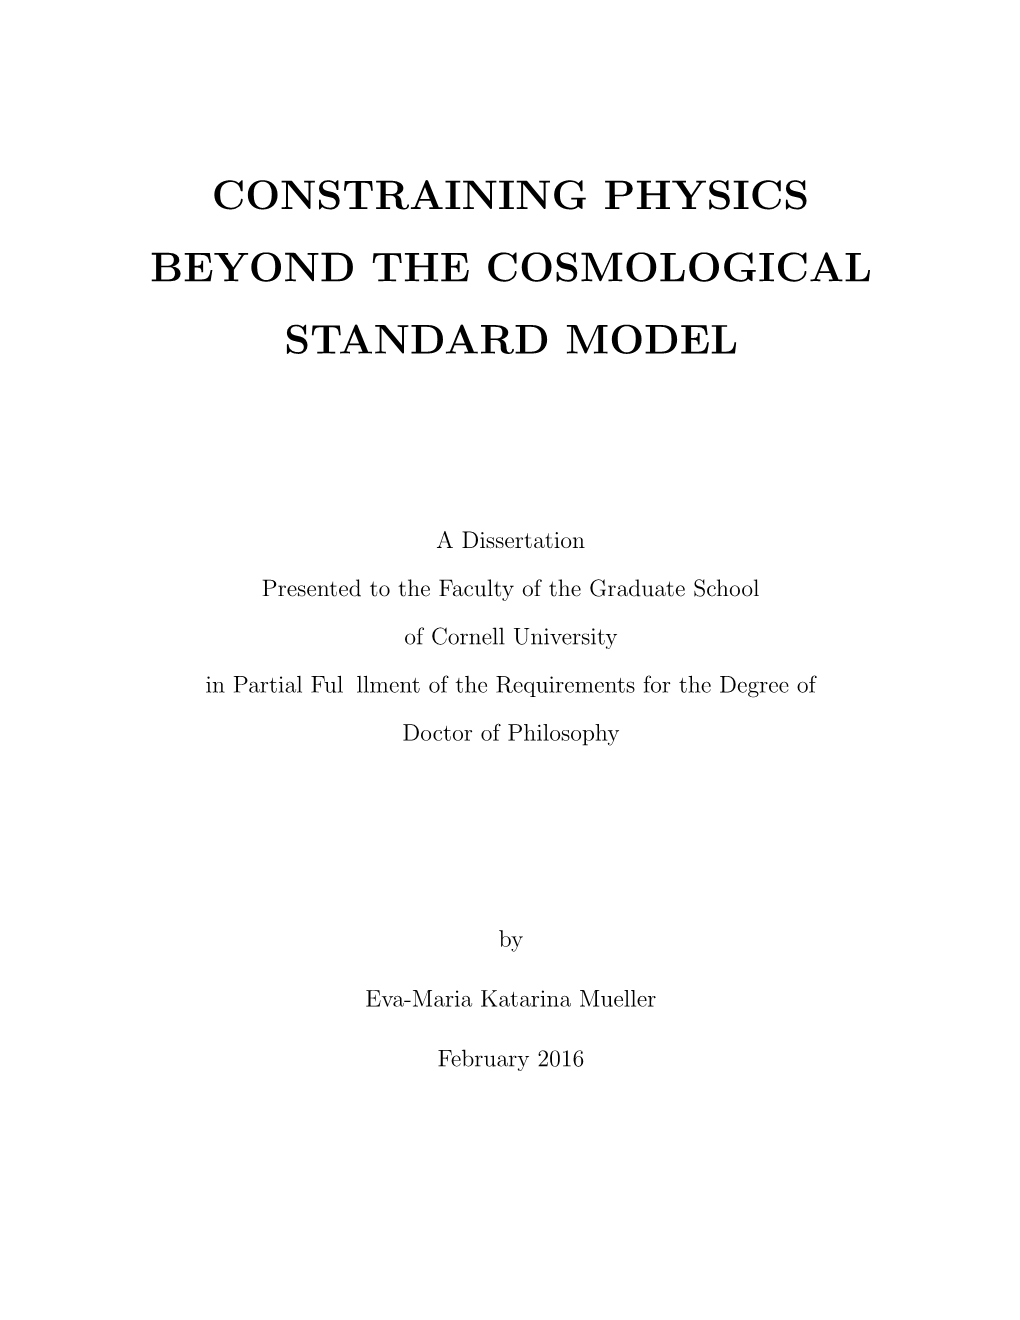 Constraining Physics Beyond the Cosmological Standard Model